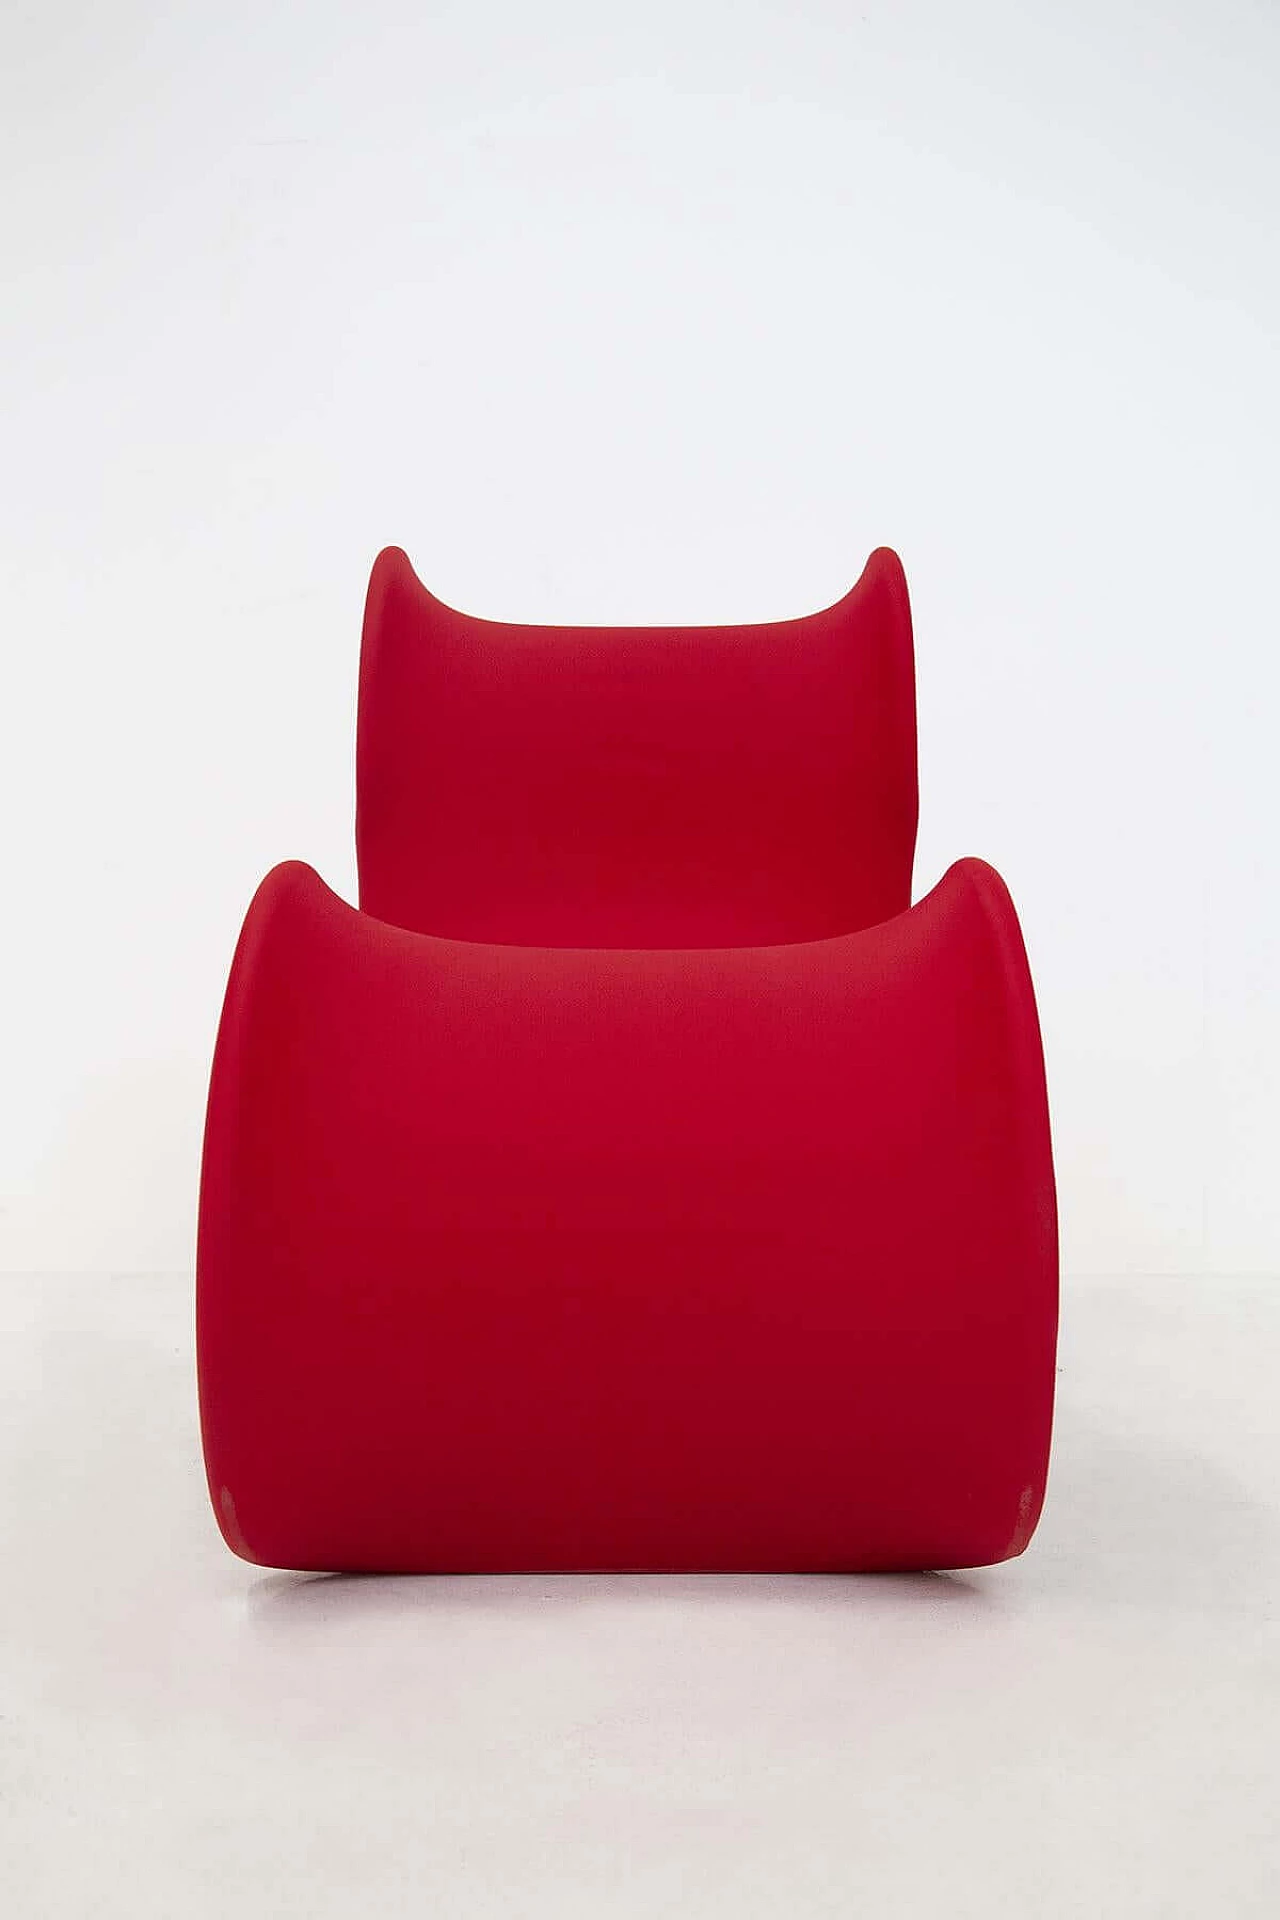 Fiocco armchair by Gianni Pareschi for Busnelli, 1970s 1467111